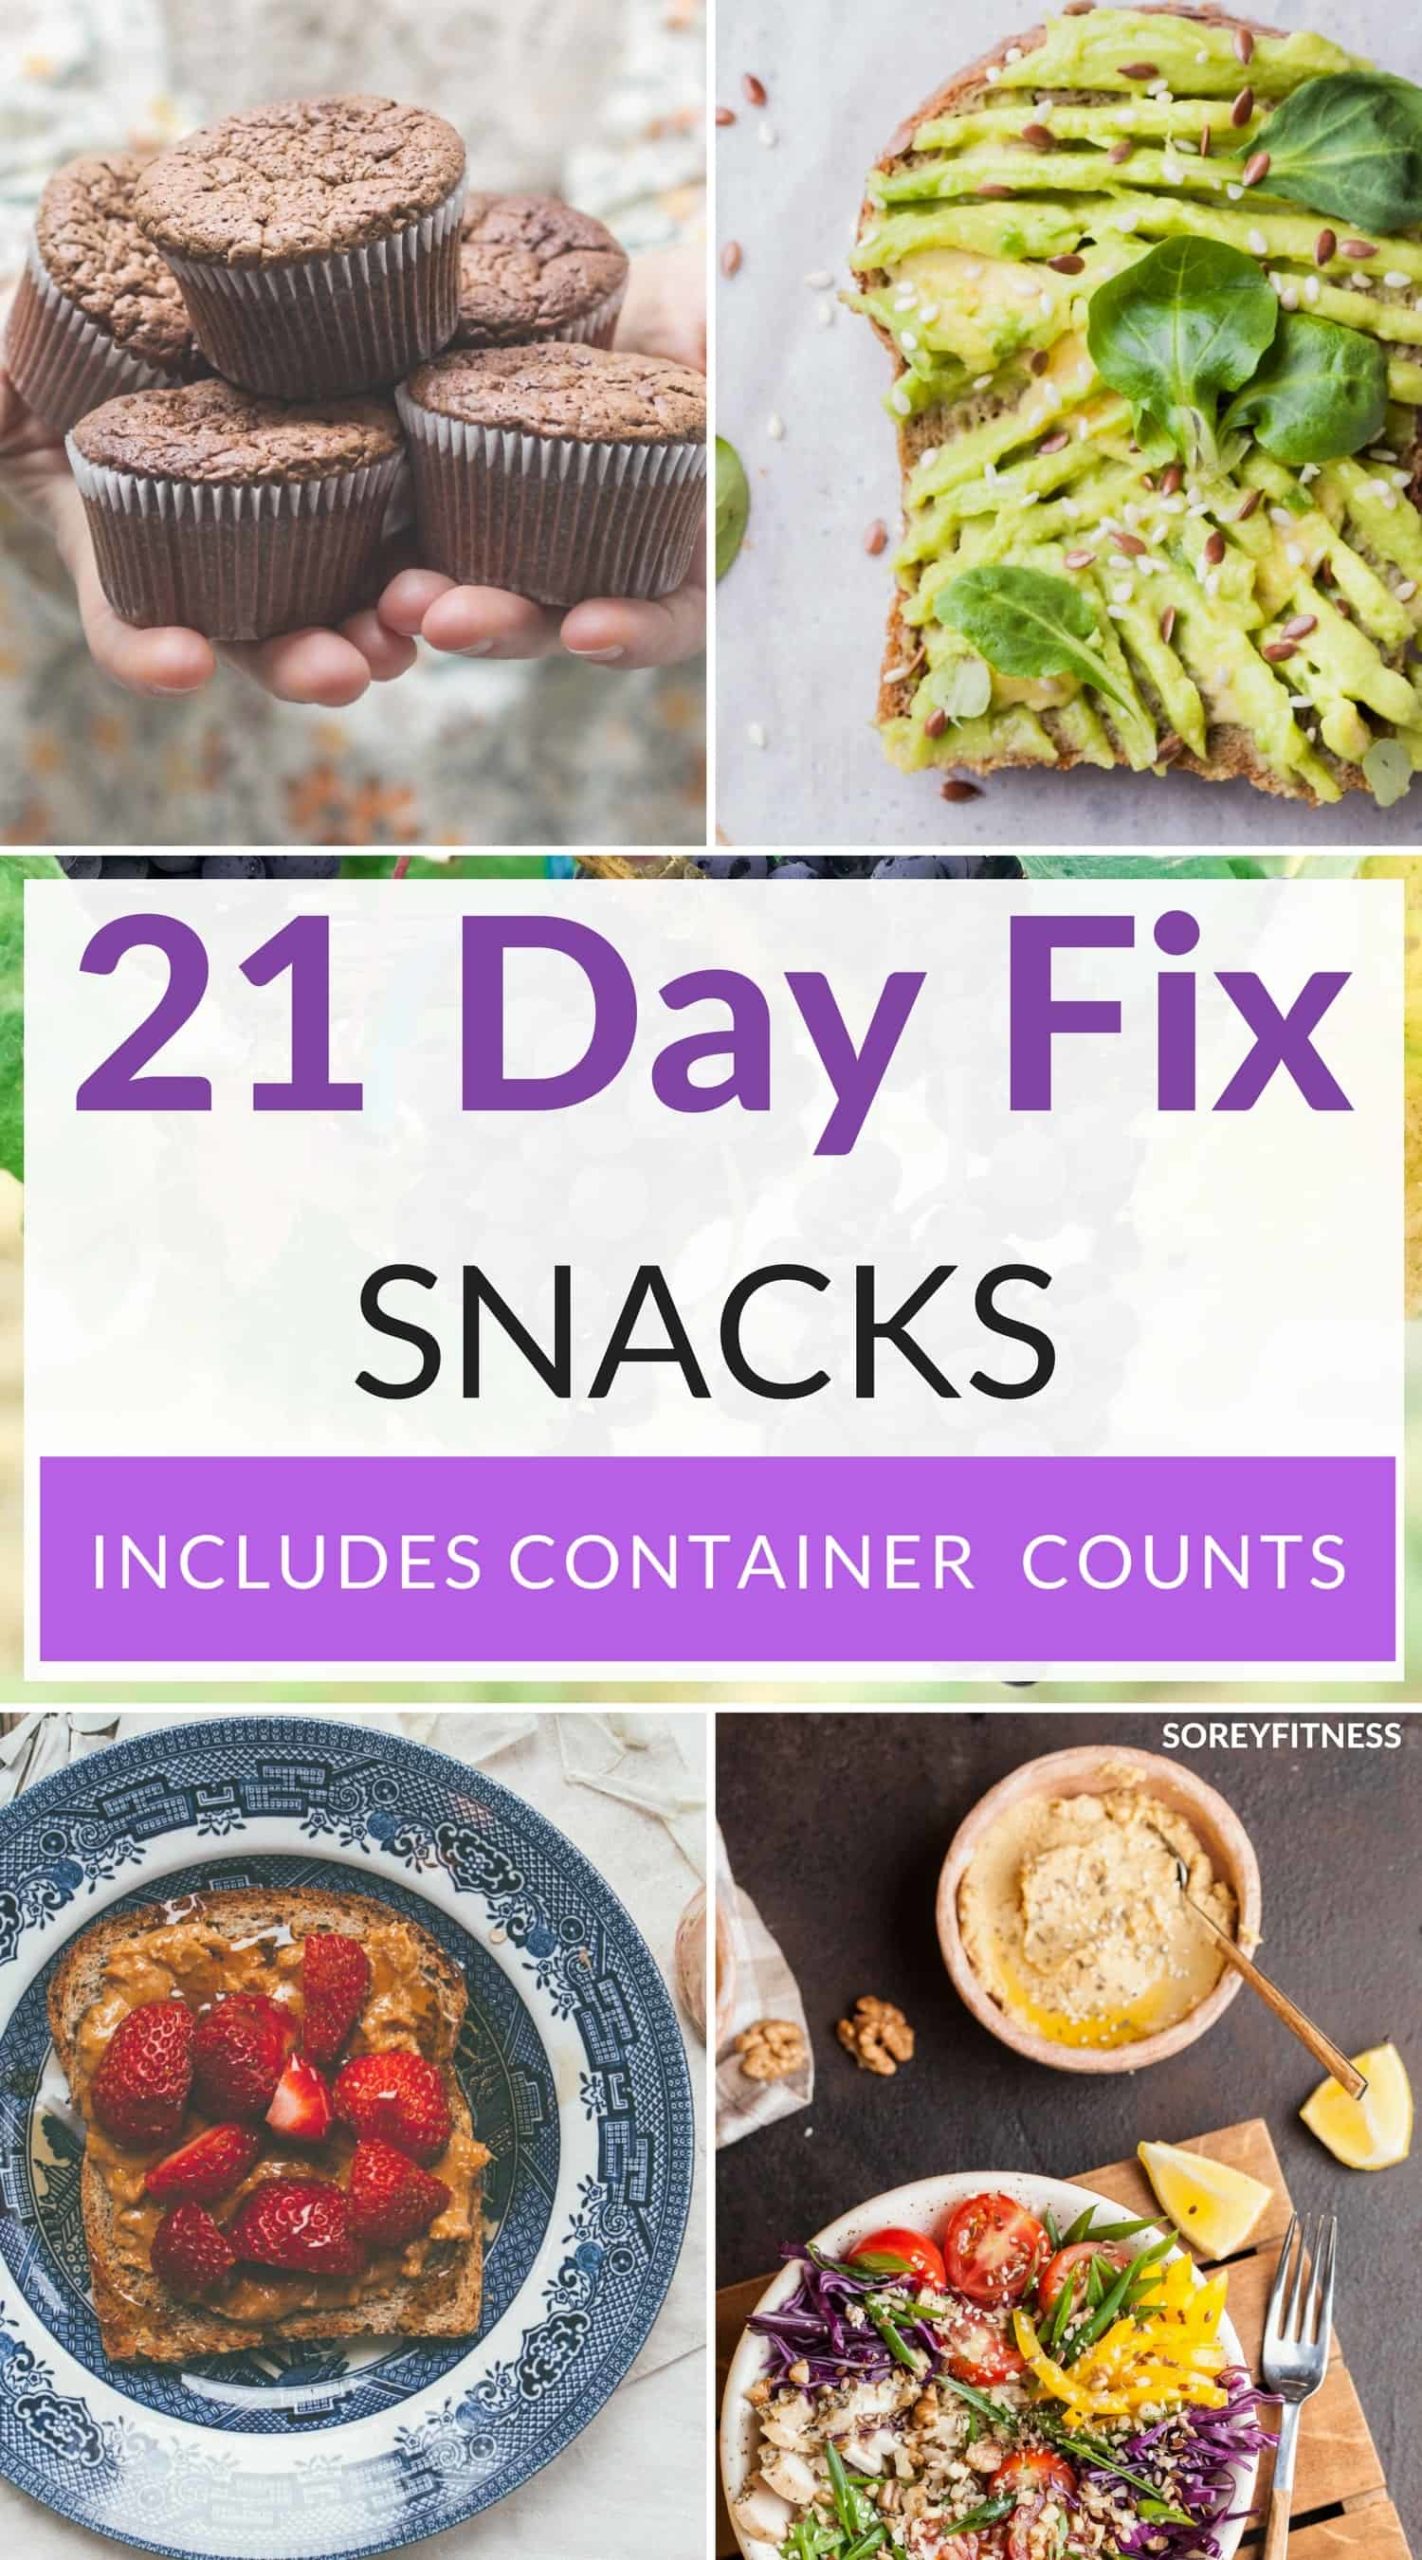 21 Day Fix - How do I know how many containers I am allowed each